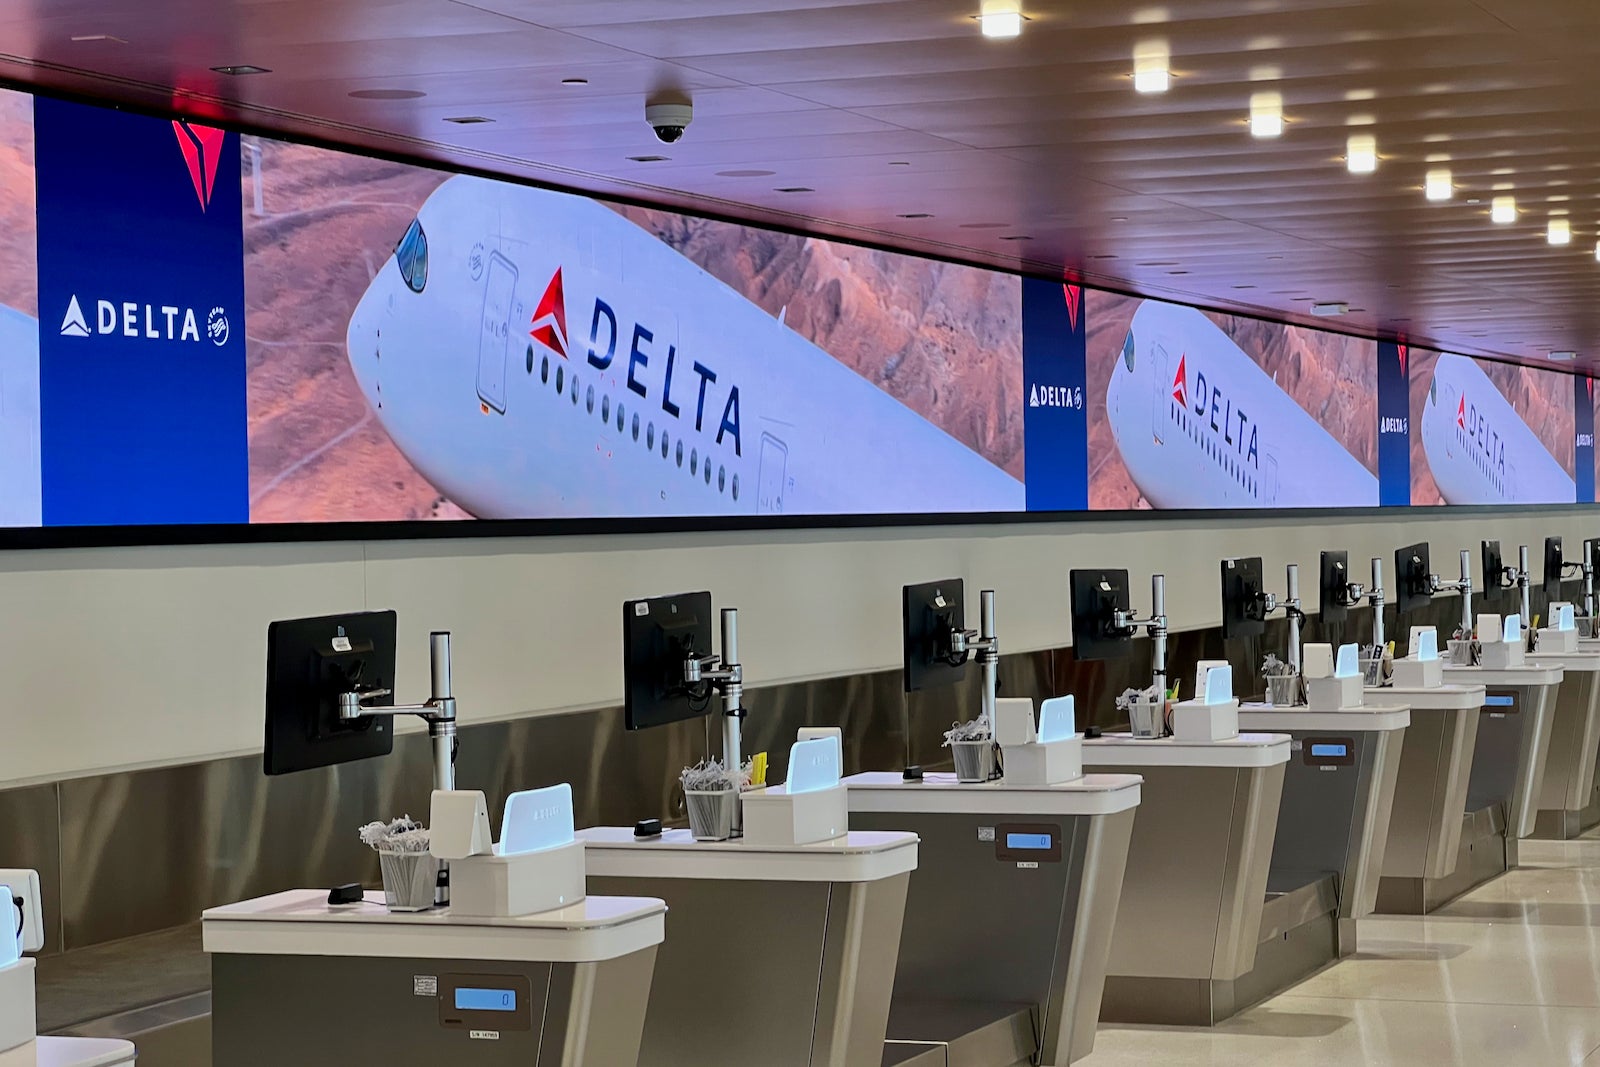 Delta will soon let you redeem miles for bag fees on many more flights